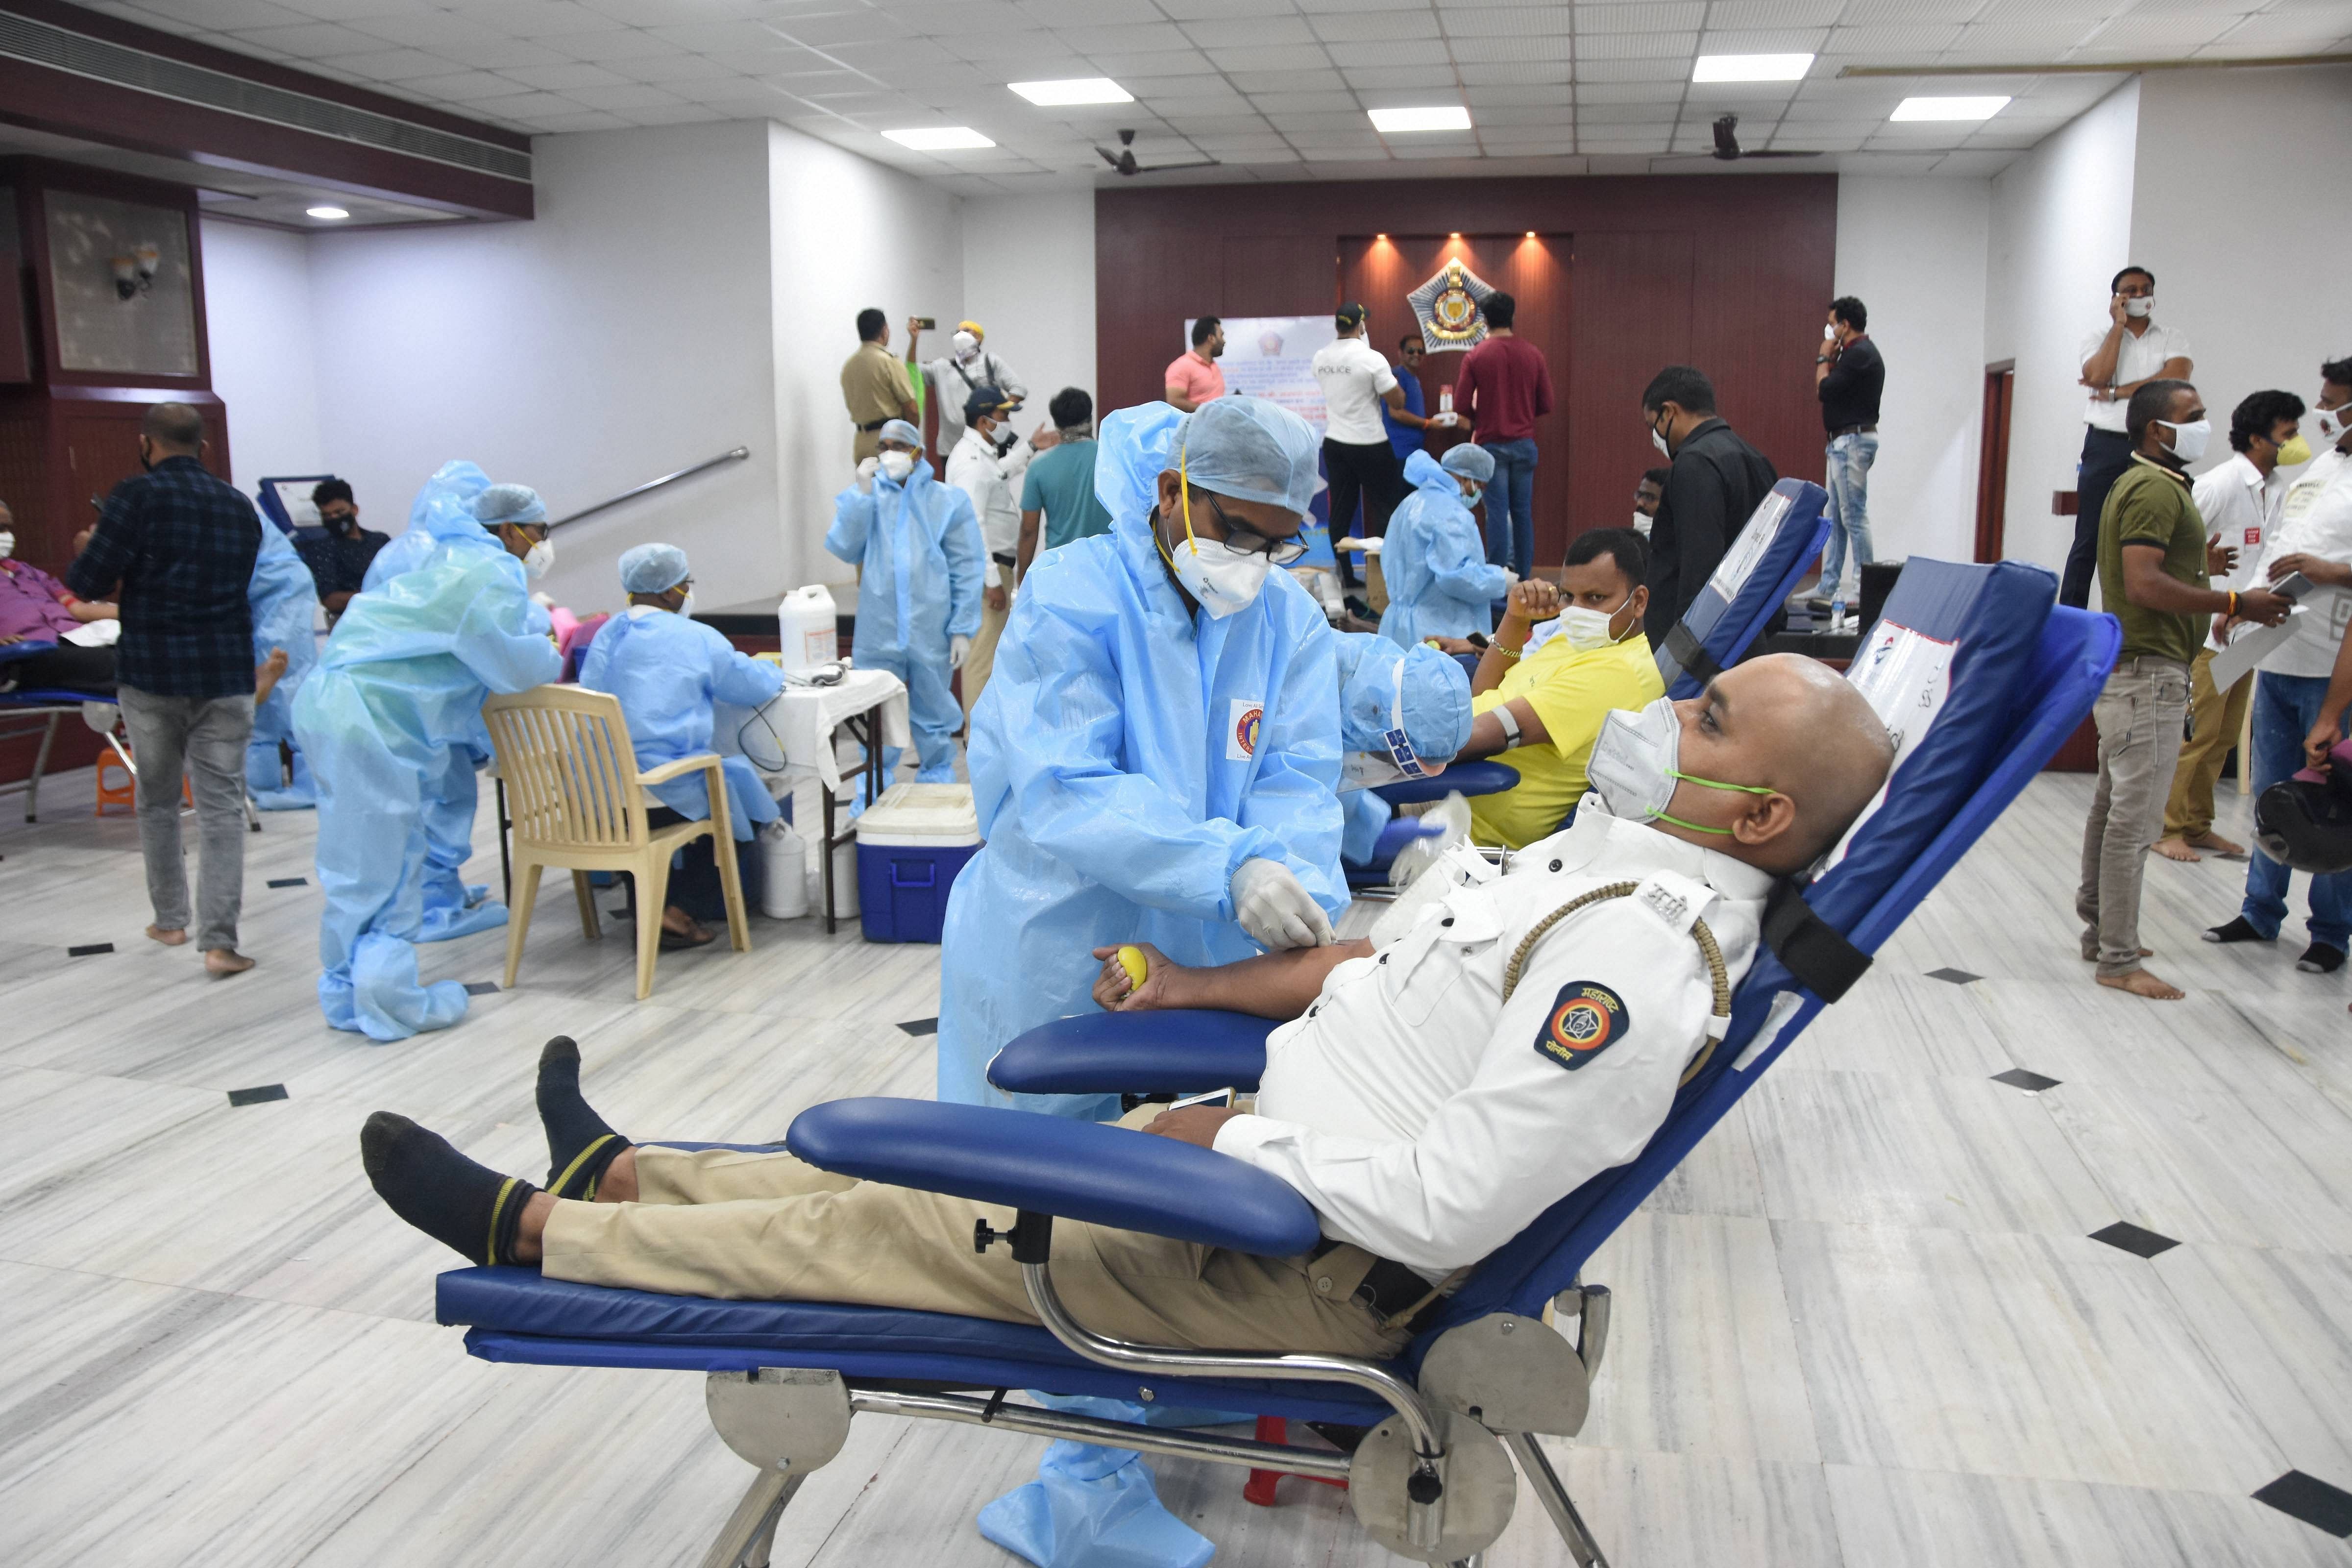 Police personnel donate blood after Maharashtra CM Uddhav Thackeray appealed donors to come forward due to the shortage of blood for COVID-19 and non-COVID patients, in Mumbai. Credits: PTI Photo